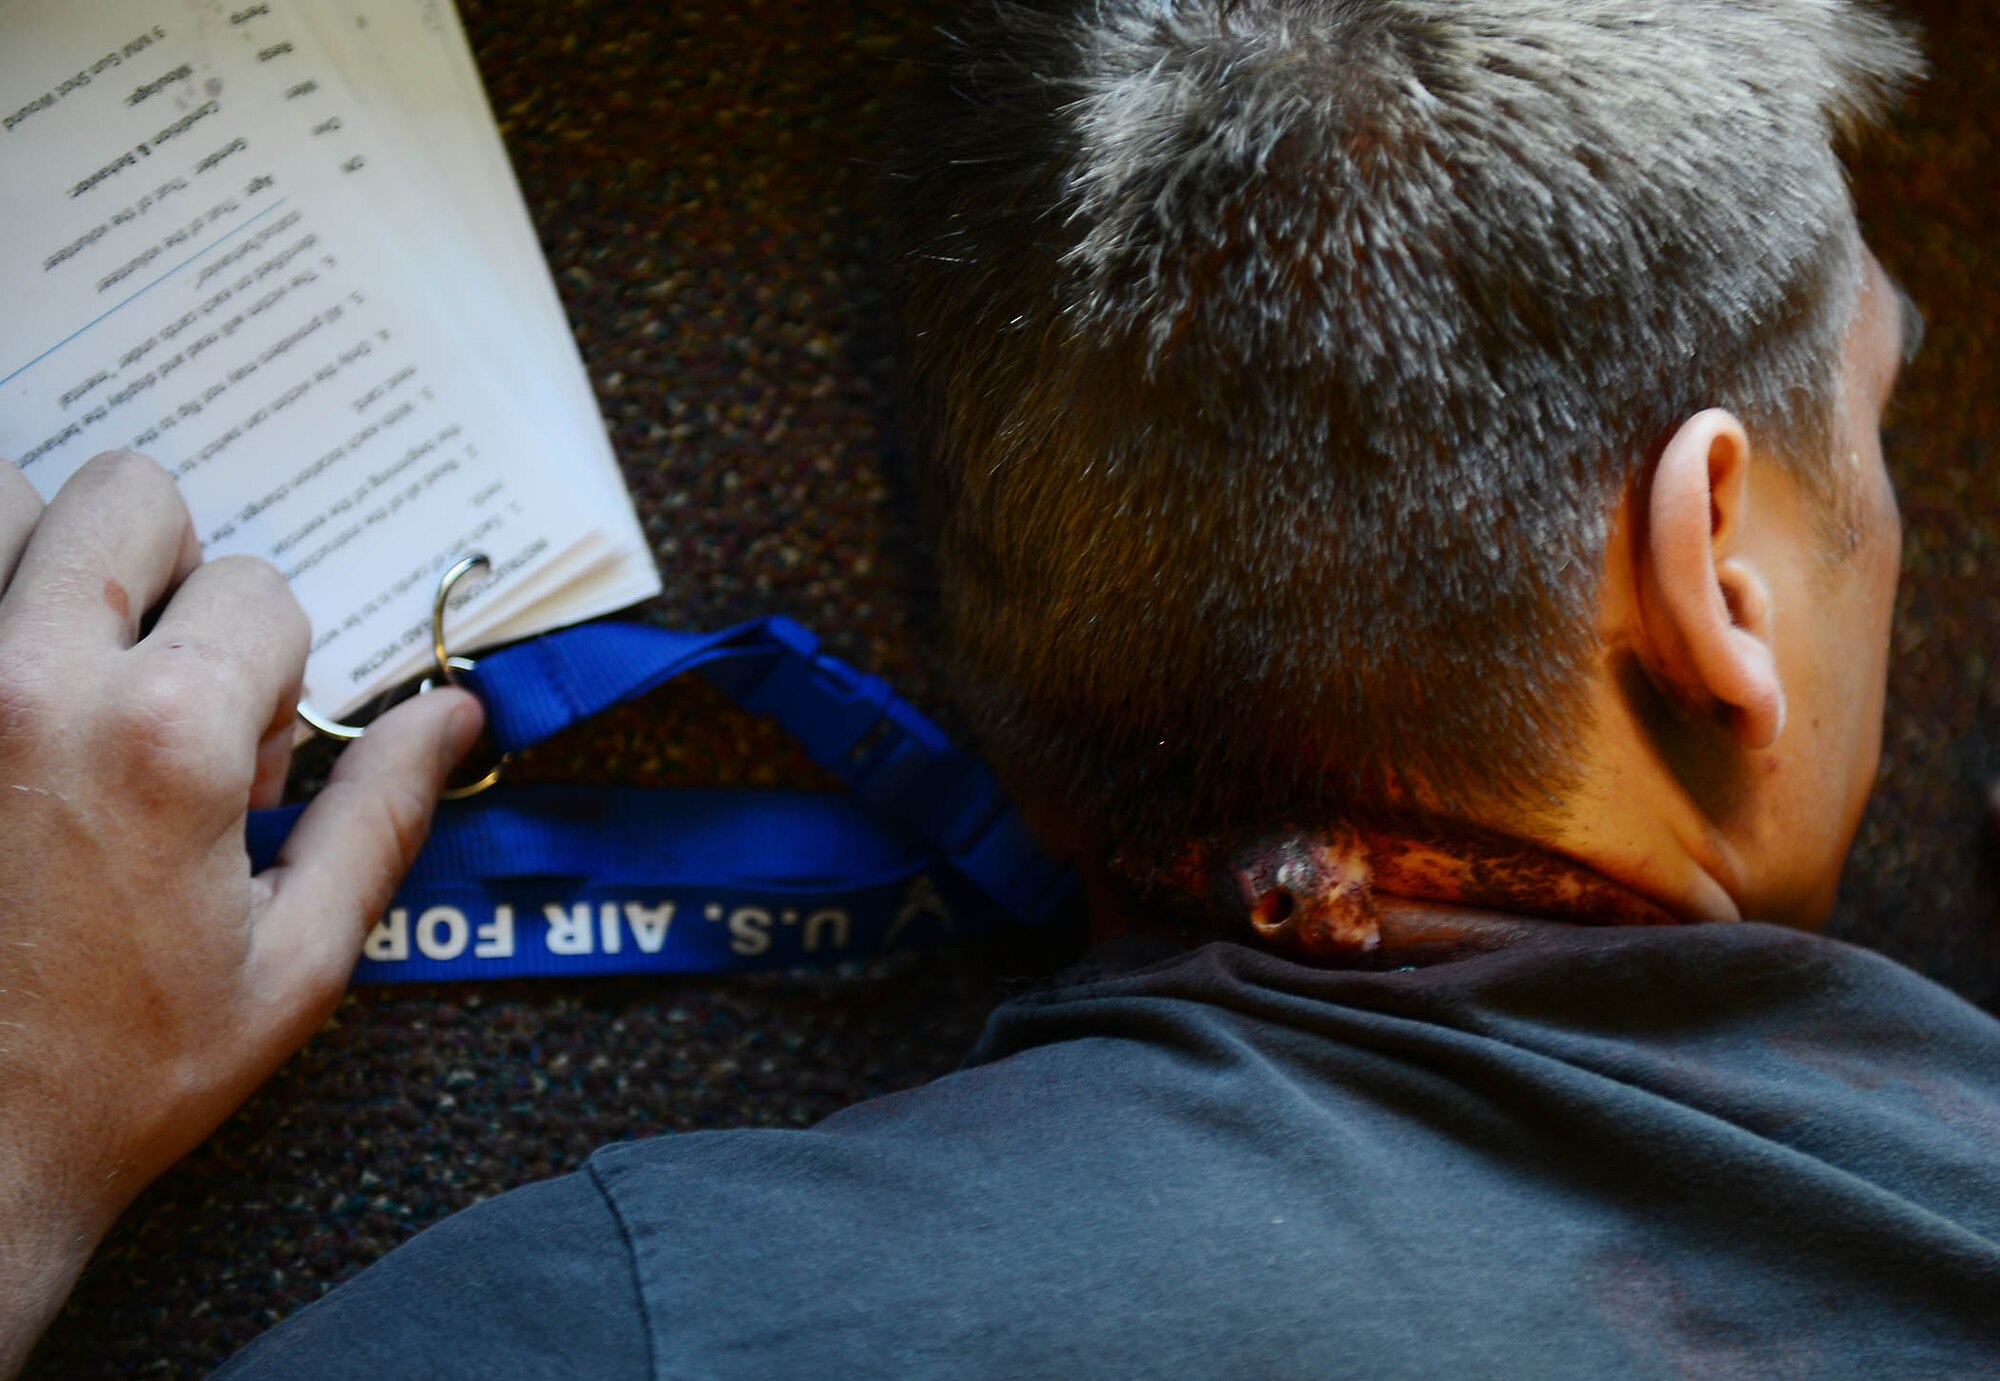 MOODY AIR FORCE BASE, Ga. – A victim lies face down in the base education office during an active shooter exercise at Moody Air Force Base, Ga., May 16, 2014. Moulage, a mold used to create realistic wounds to maximize medical training, was applied to the victim’s neck to mimic a gunshot wound. (U.S. Air Force photo by Senior Airman Tiffany M. Grigg/Released)